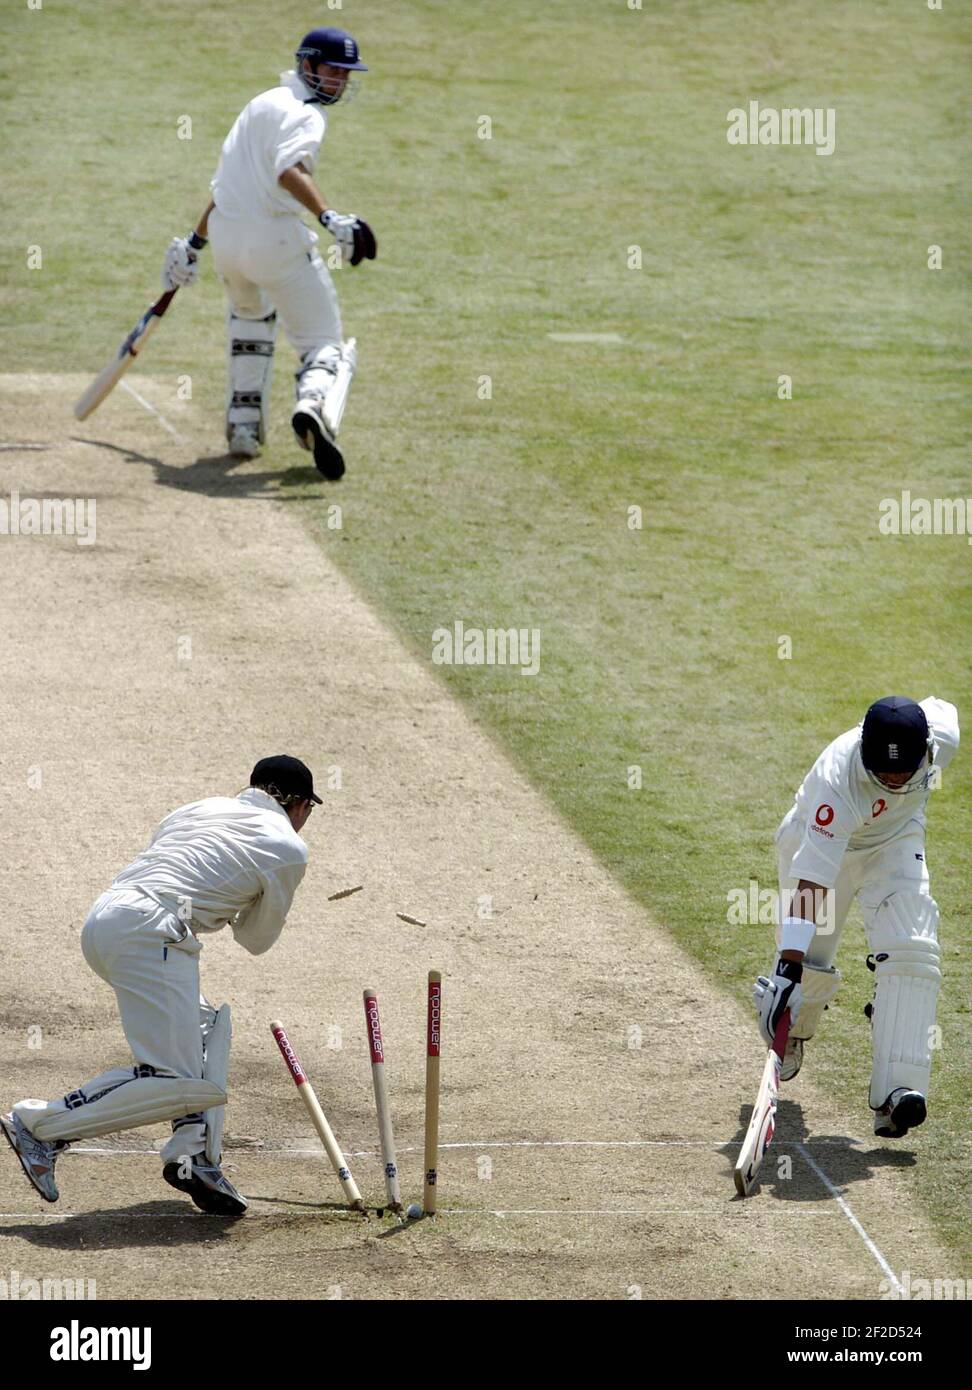 THORPE ALMOST RUN OUT PICTURE DAVID ASHDOWNTest Cricket Stock Photo